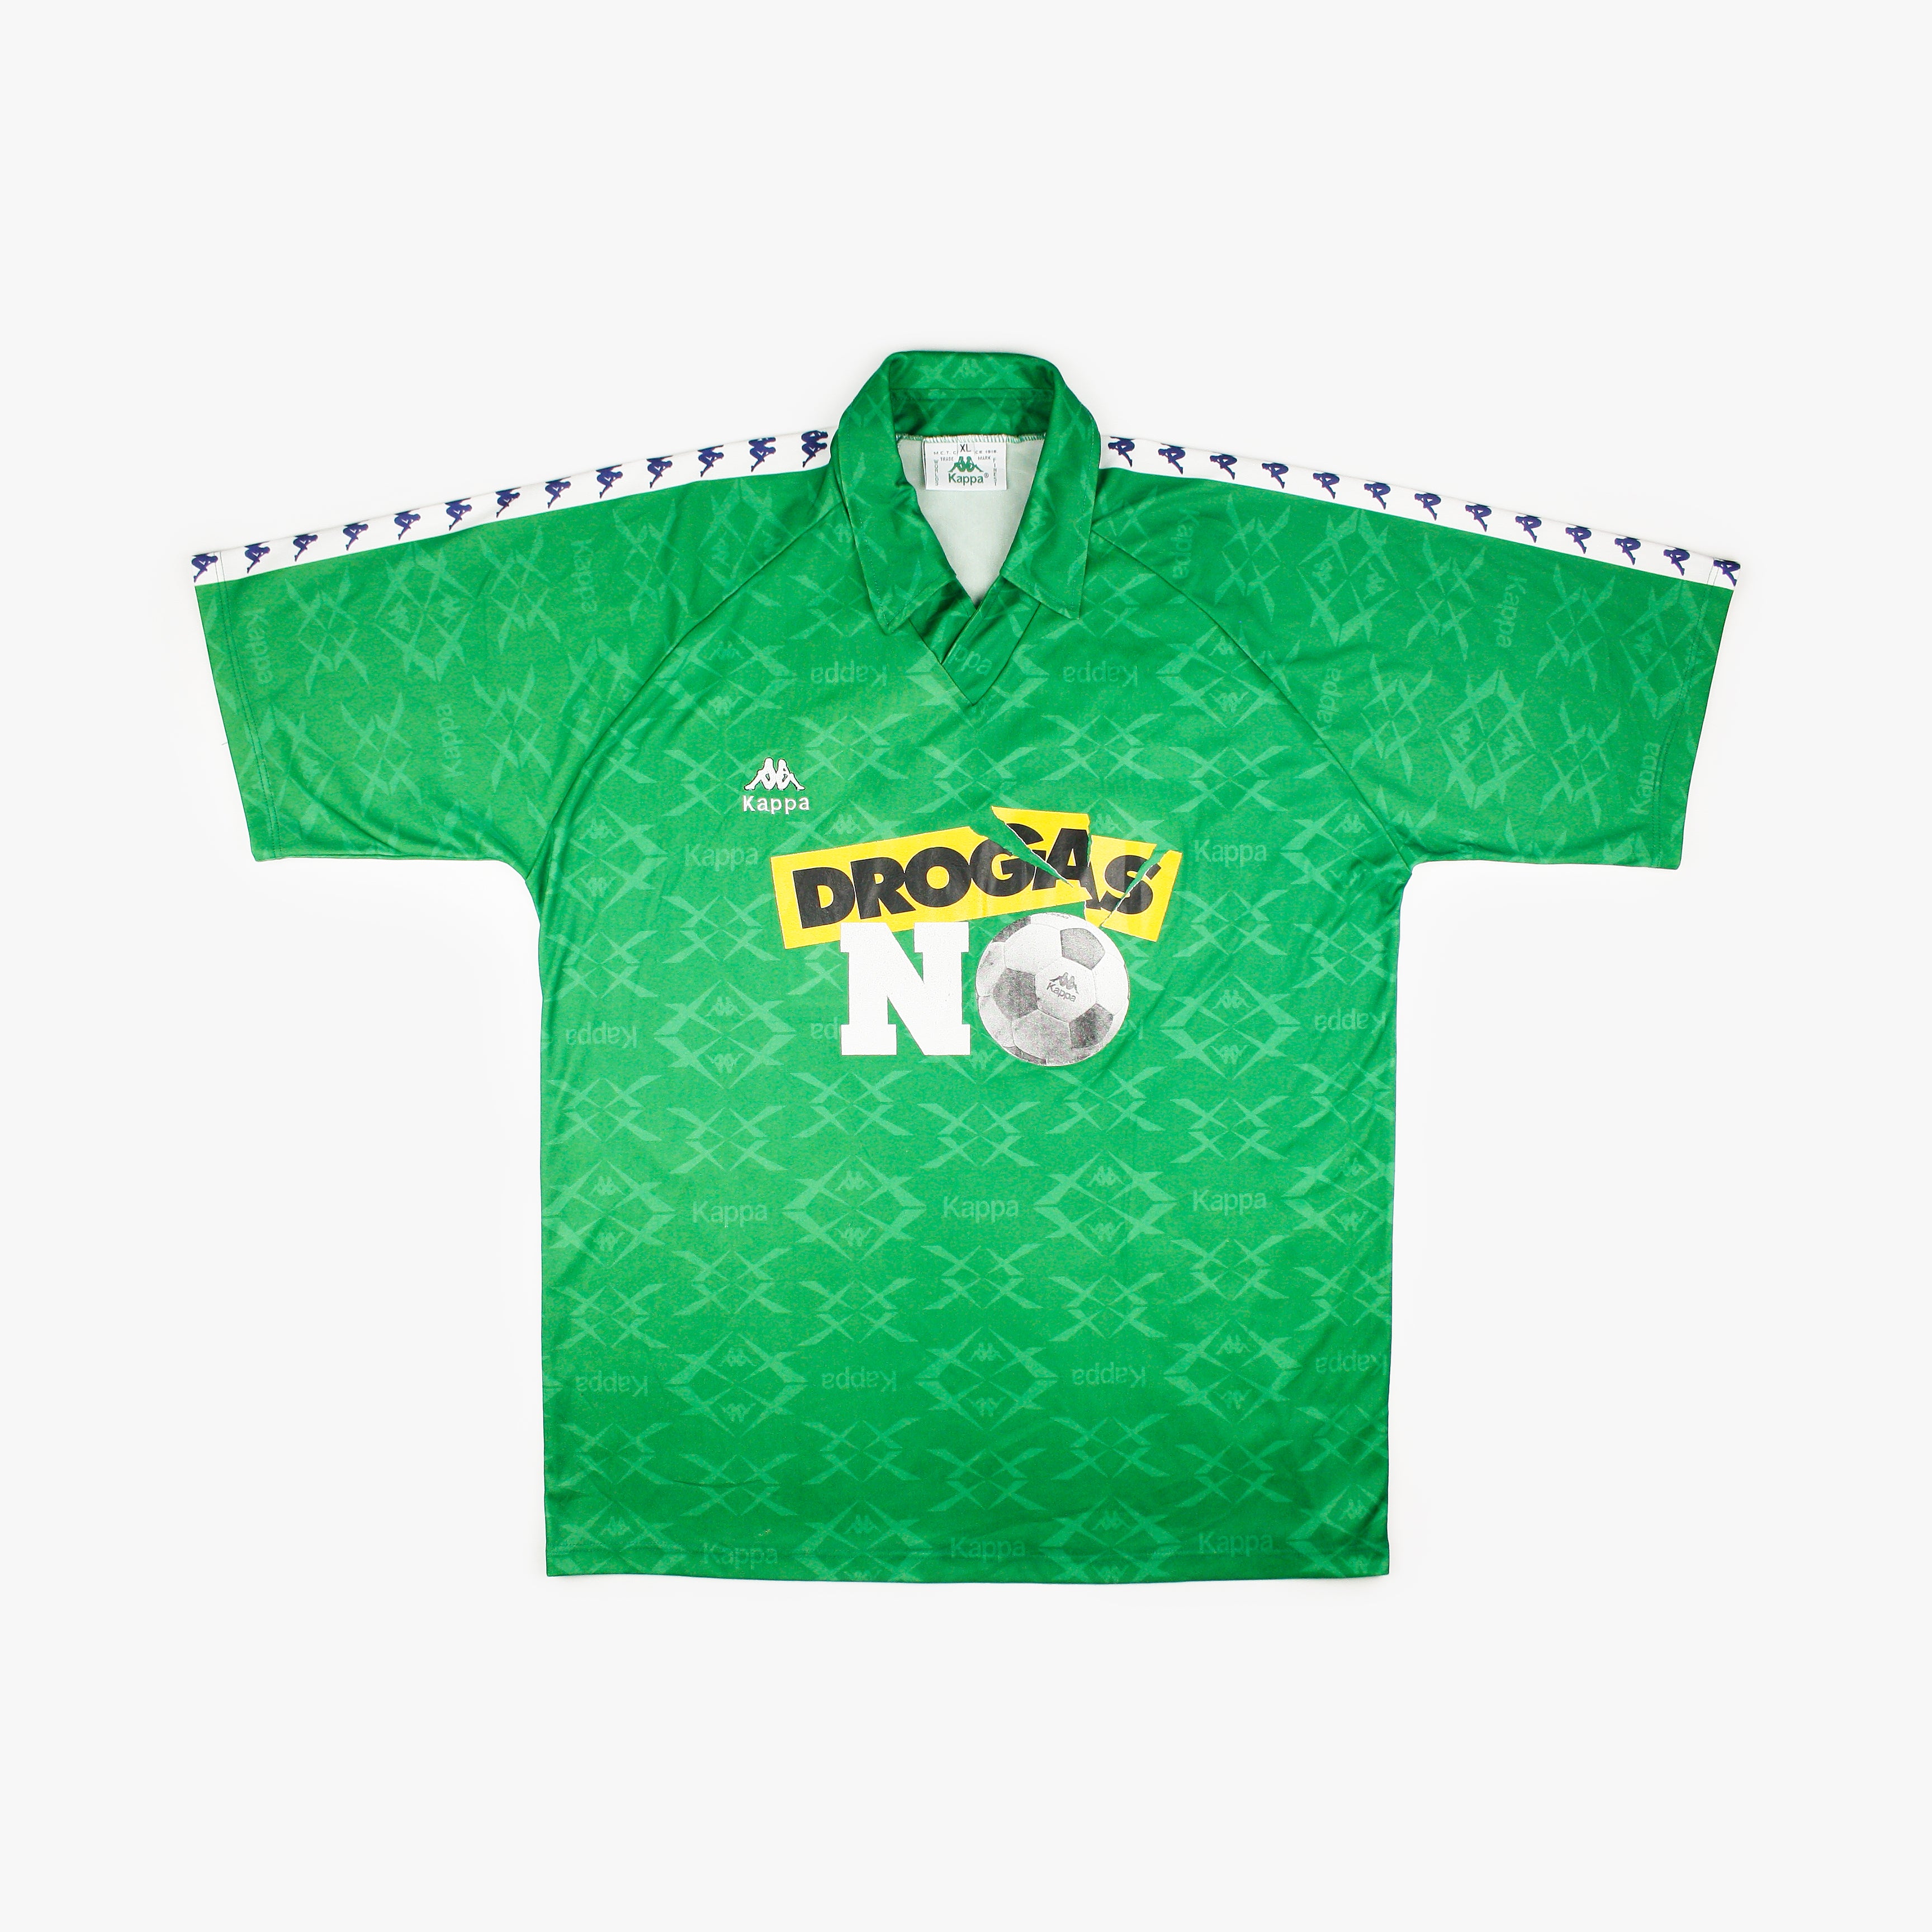 Drogas No' 94 • **Match Issue** Shirt • • #52 – Real Vintage Football